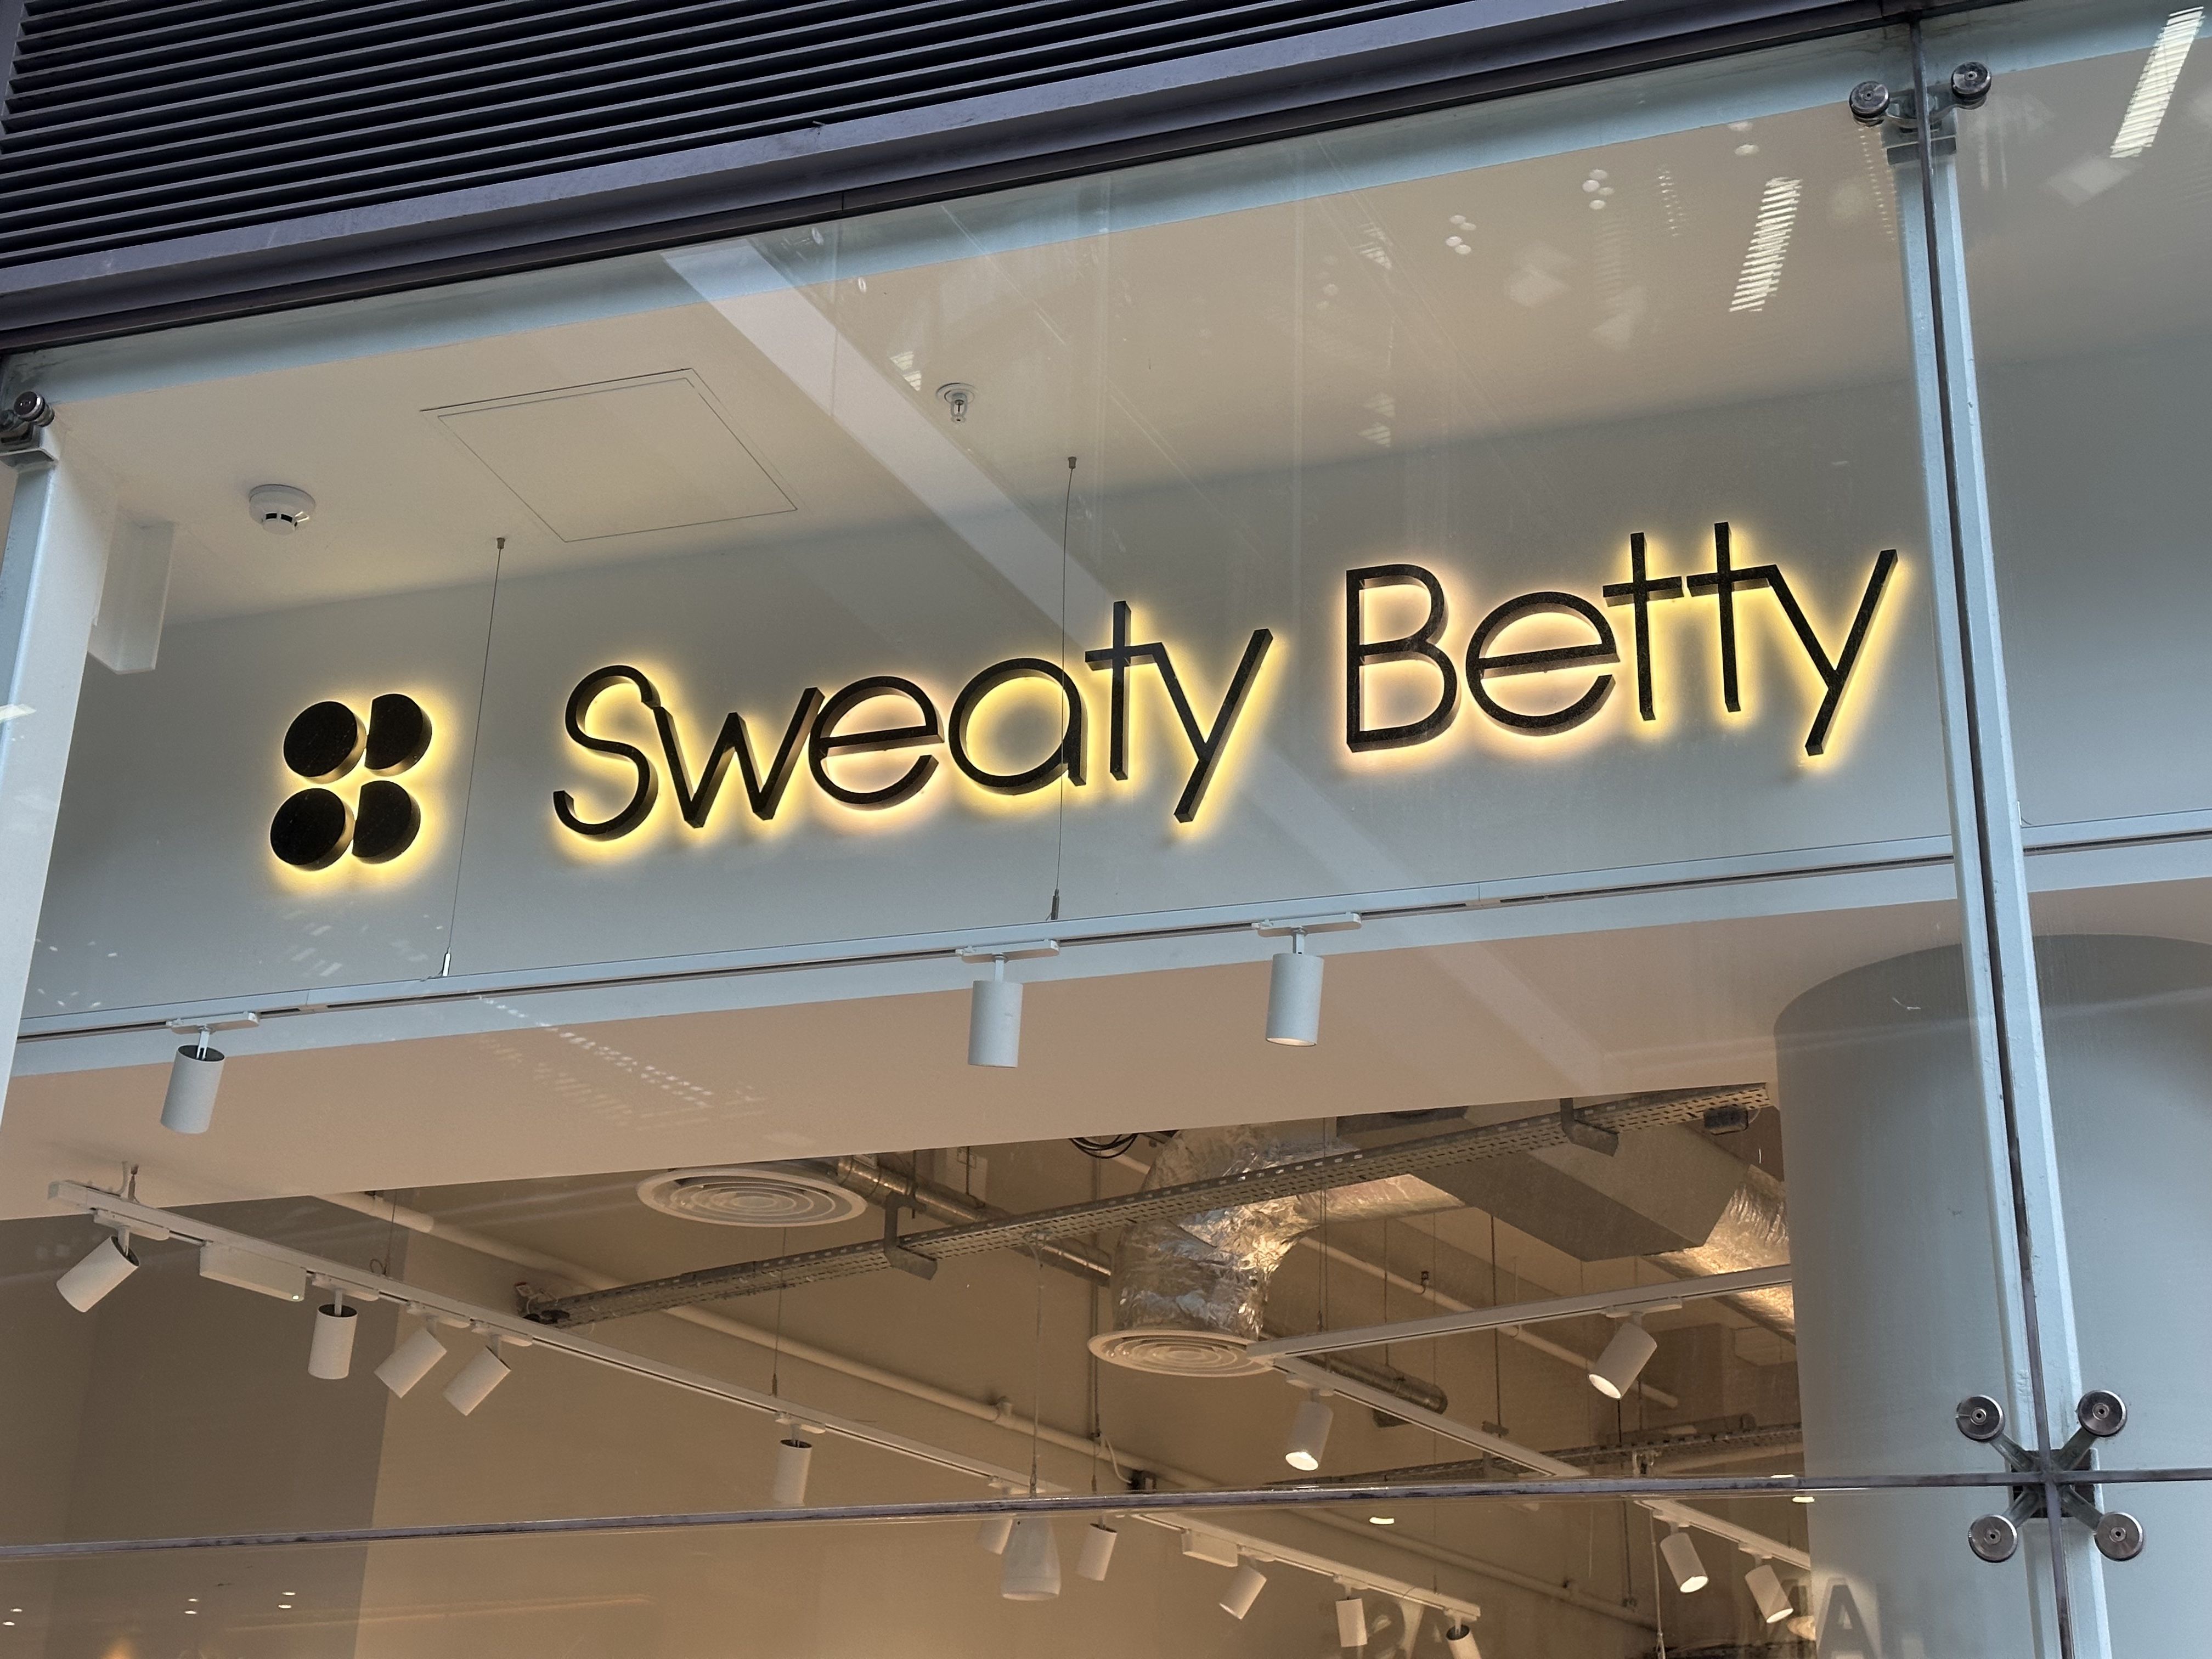 What we're buying in the Sweaty Betty summer sale